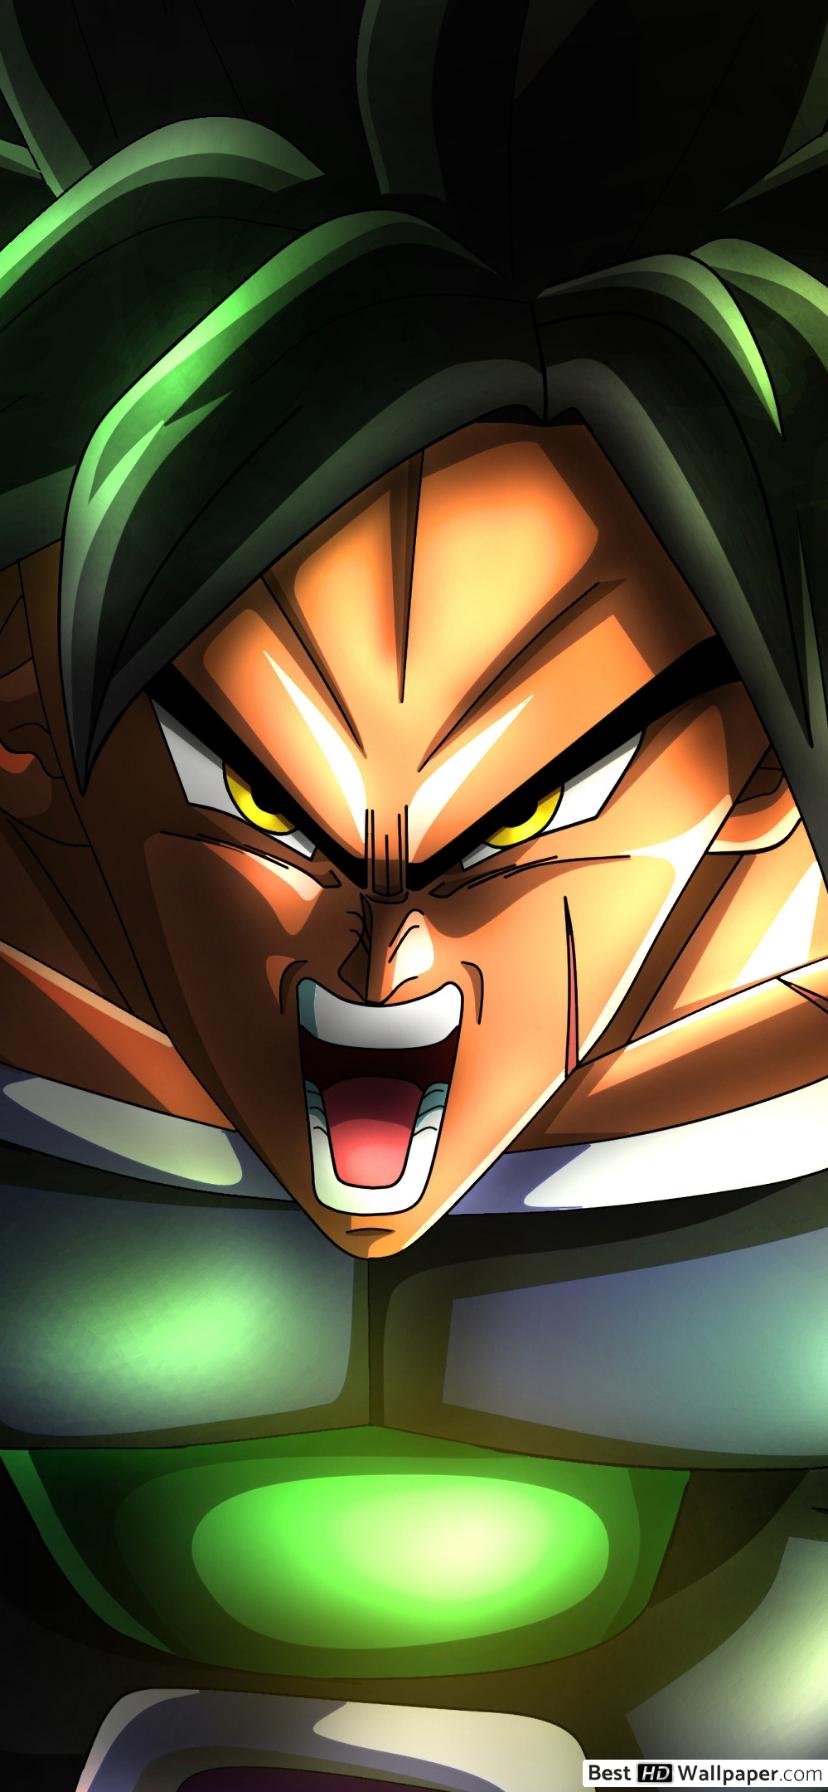 Iphone Dragon Ball Hd Wallpapers - Wallpaper Cave